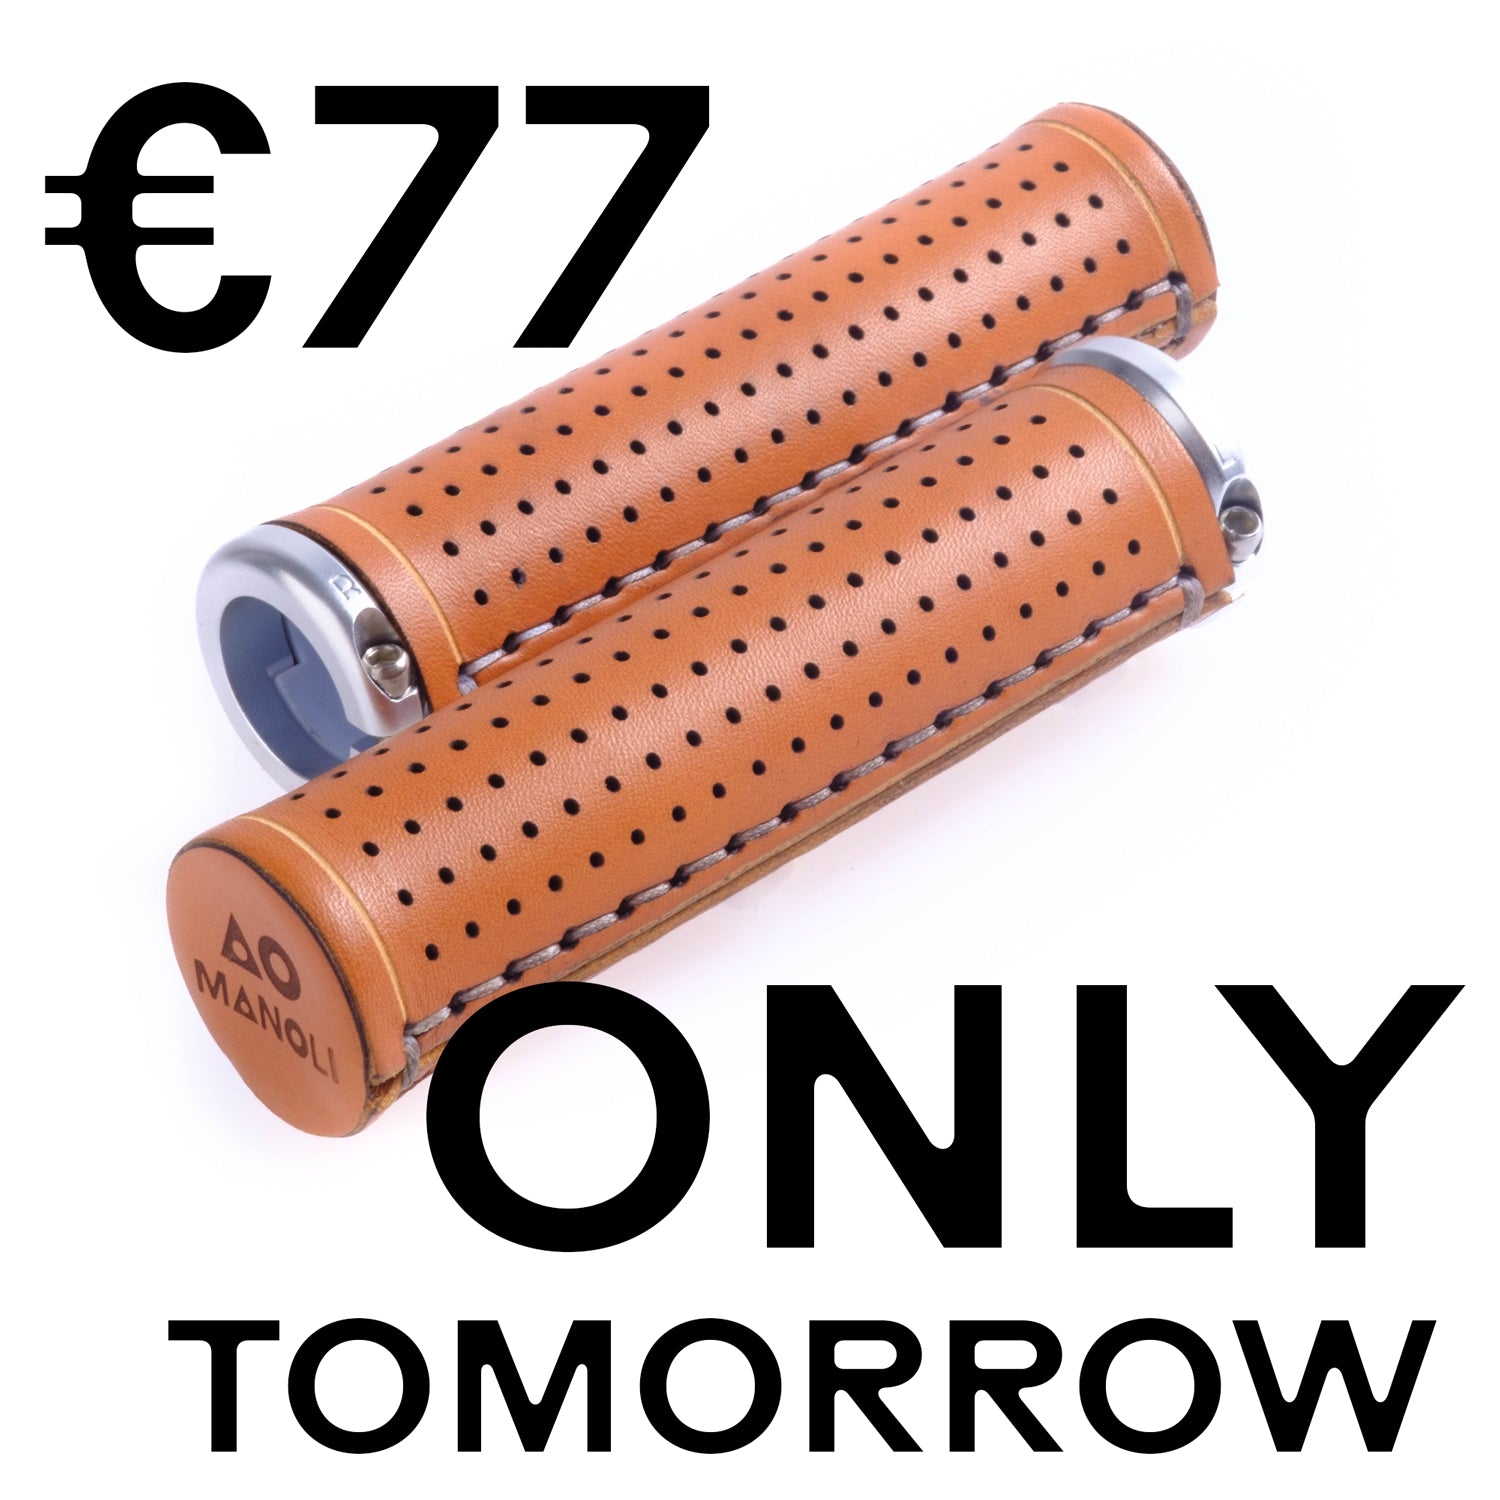 One Pair of Manoli Grips for only €77! Limited Time!